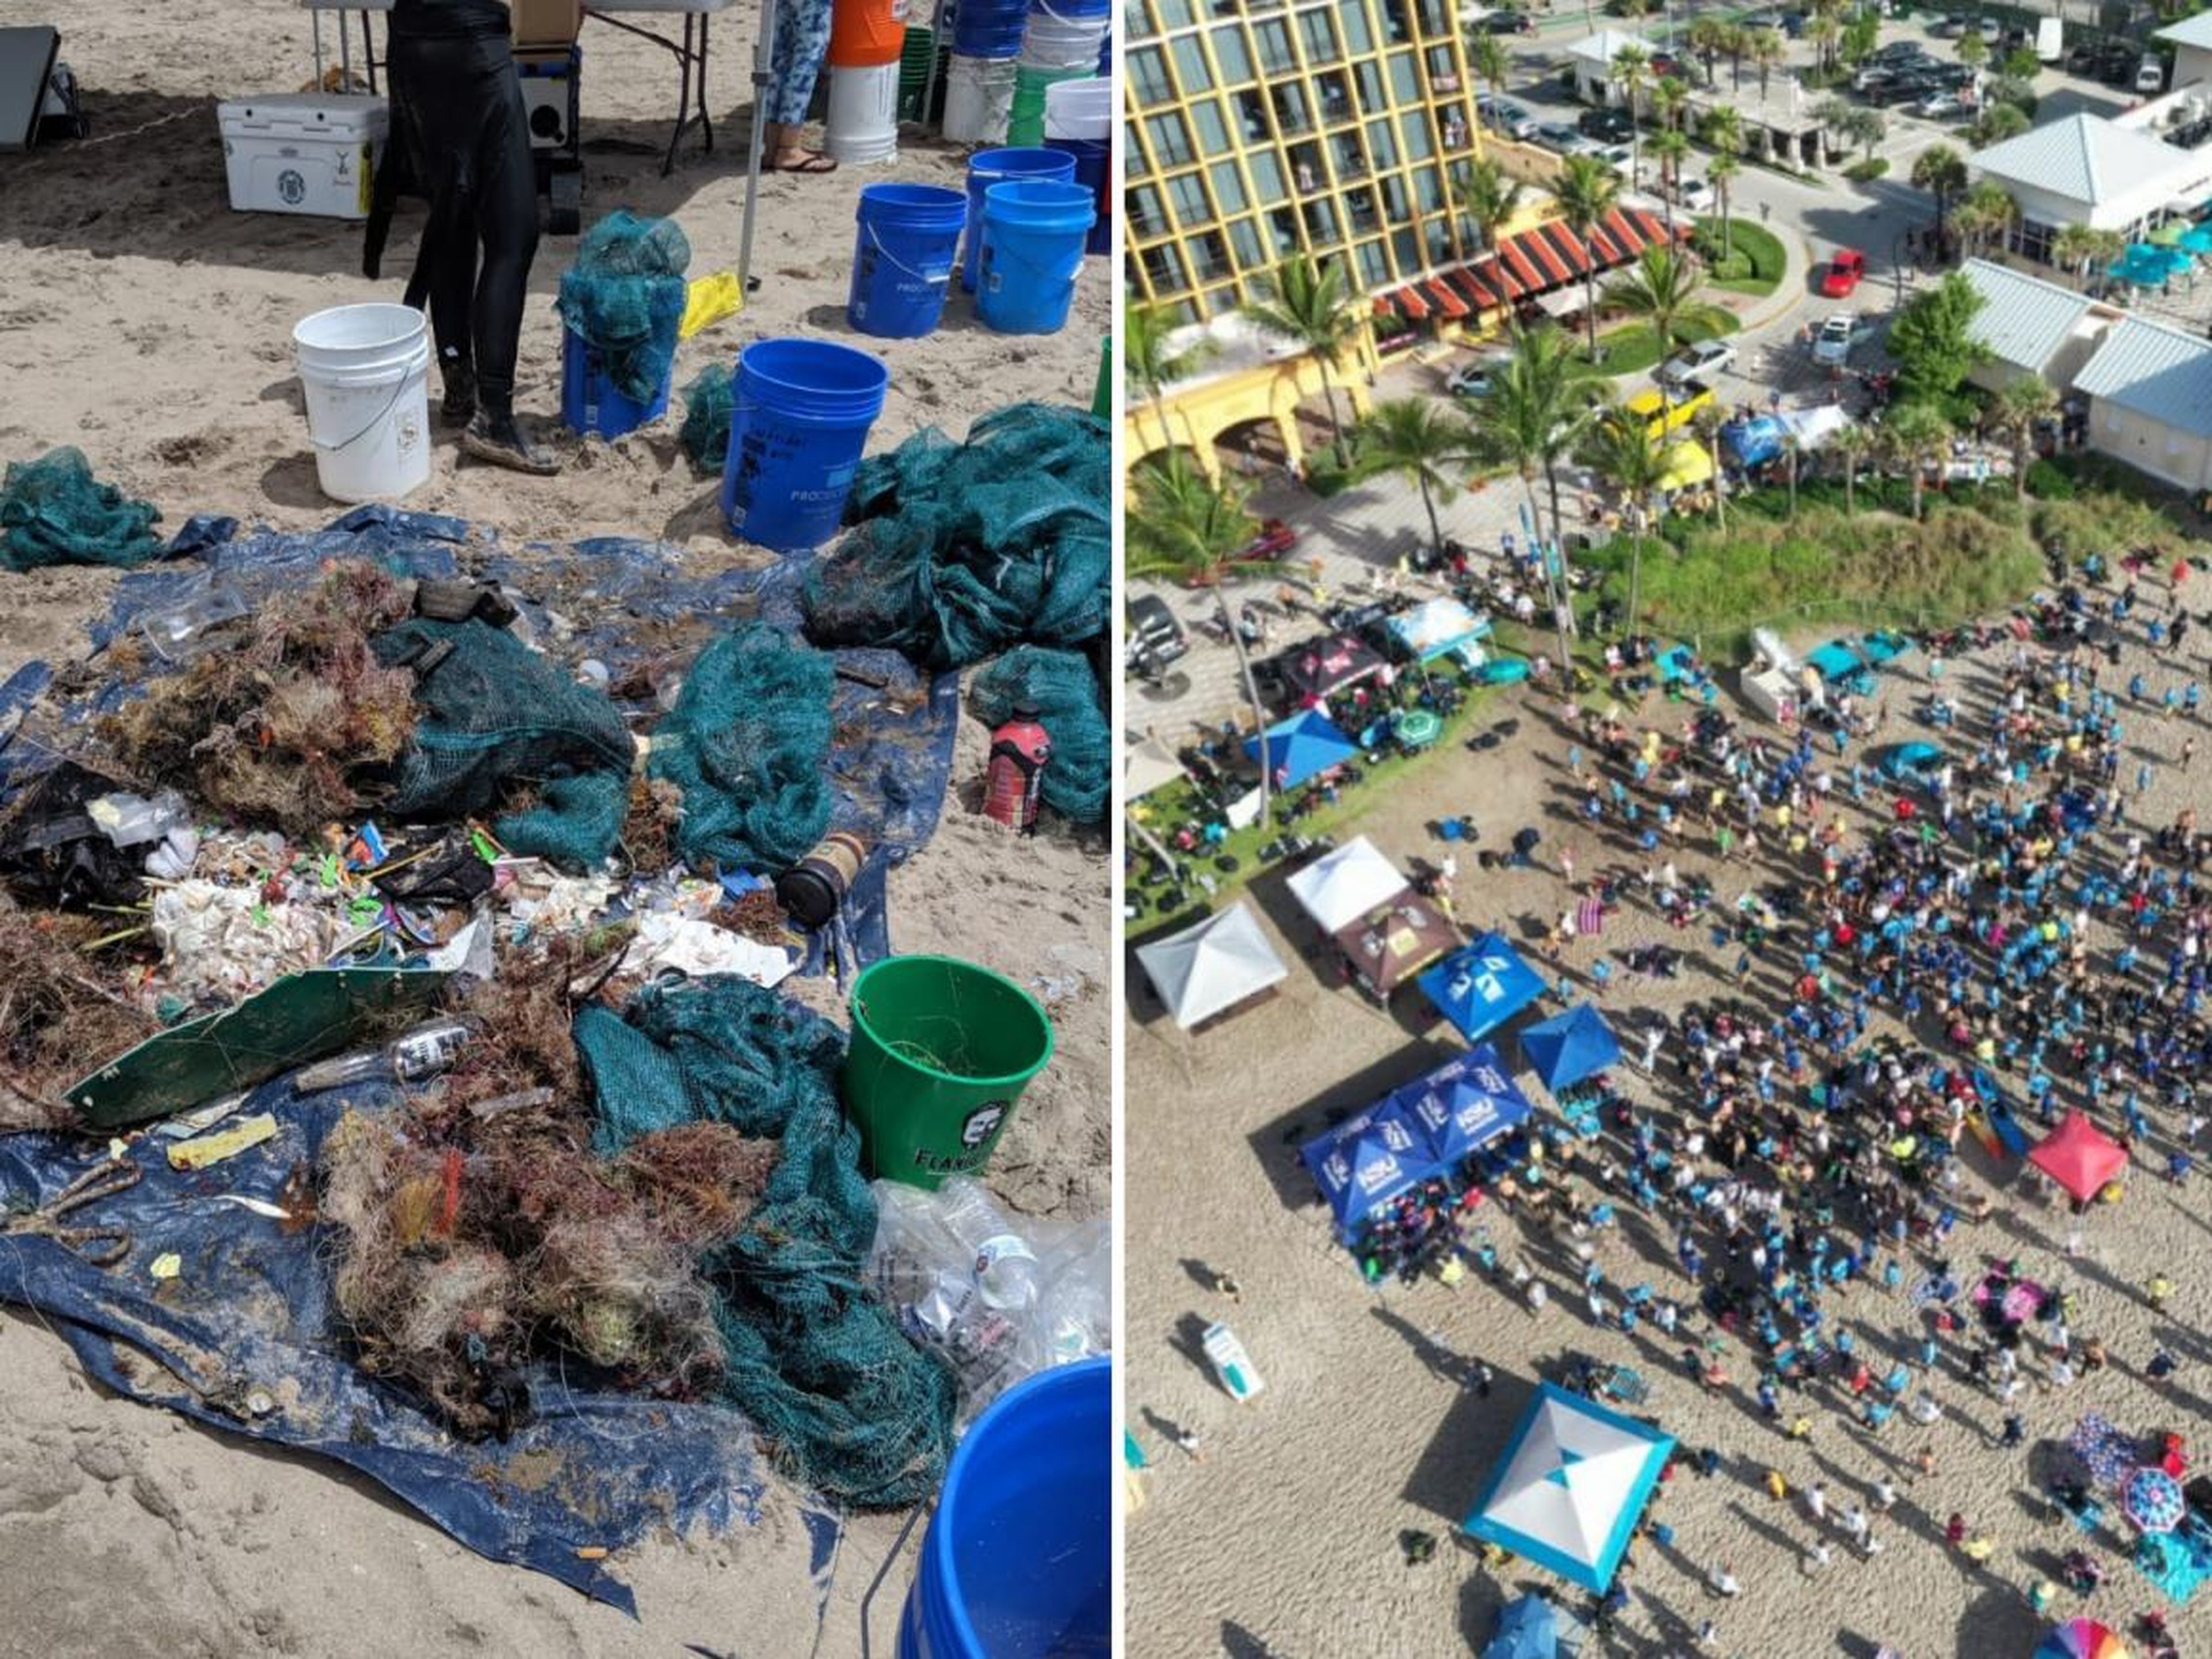 Photos from the world's largest ocean cleanup that took place in Deerfield Beach, Florida.